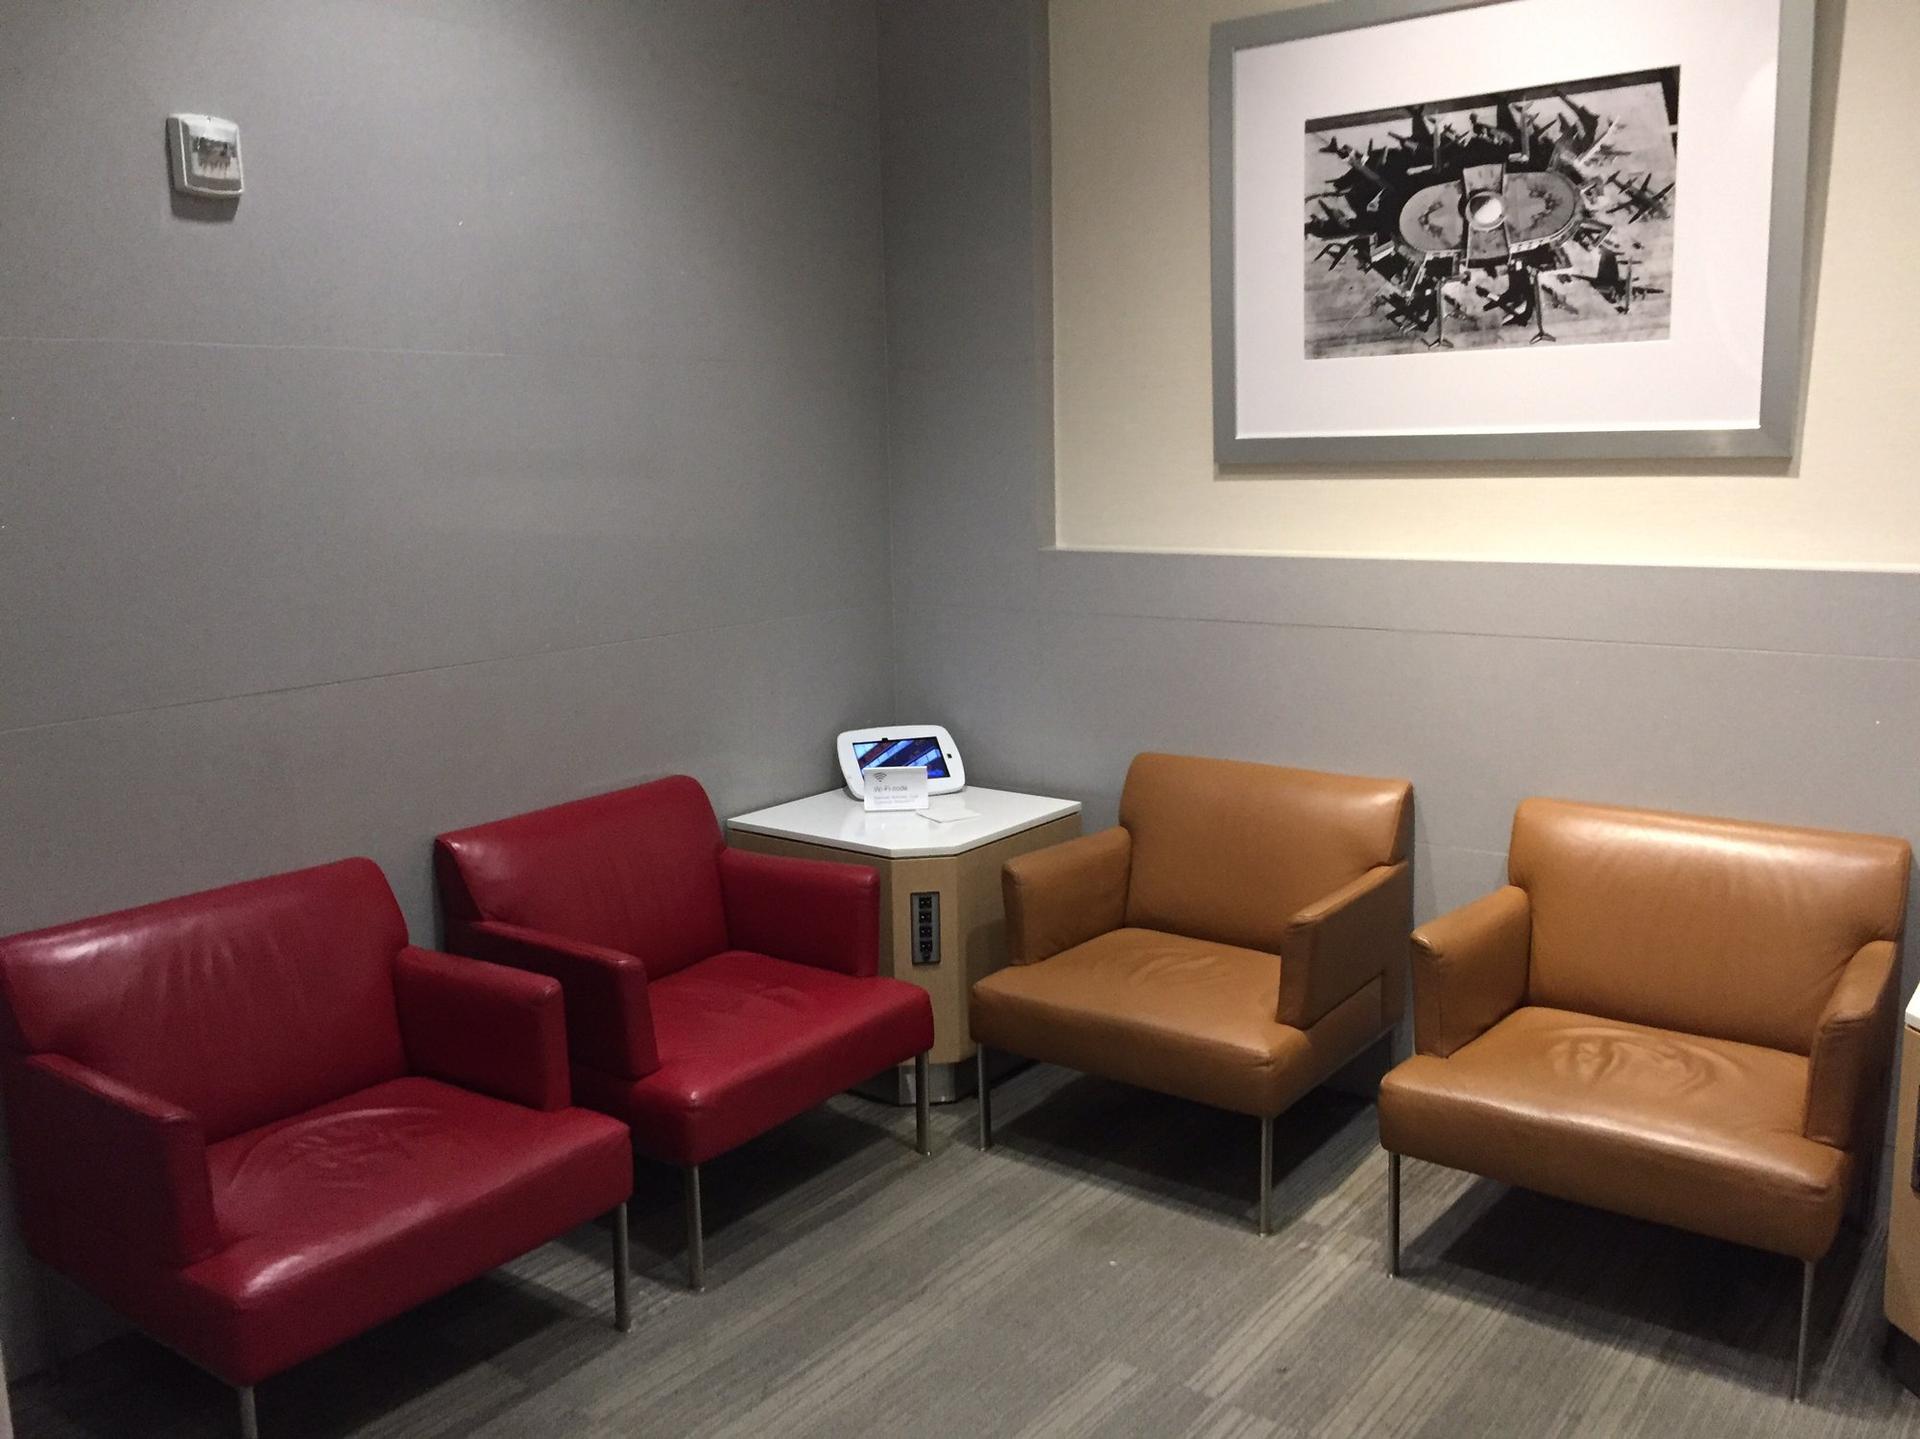 American Airlines Admirals Club image 34 of 43